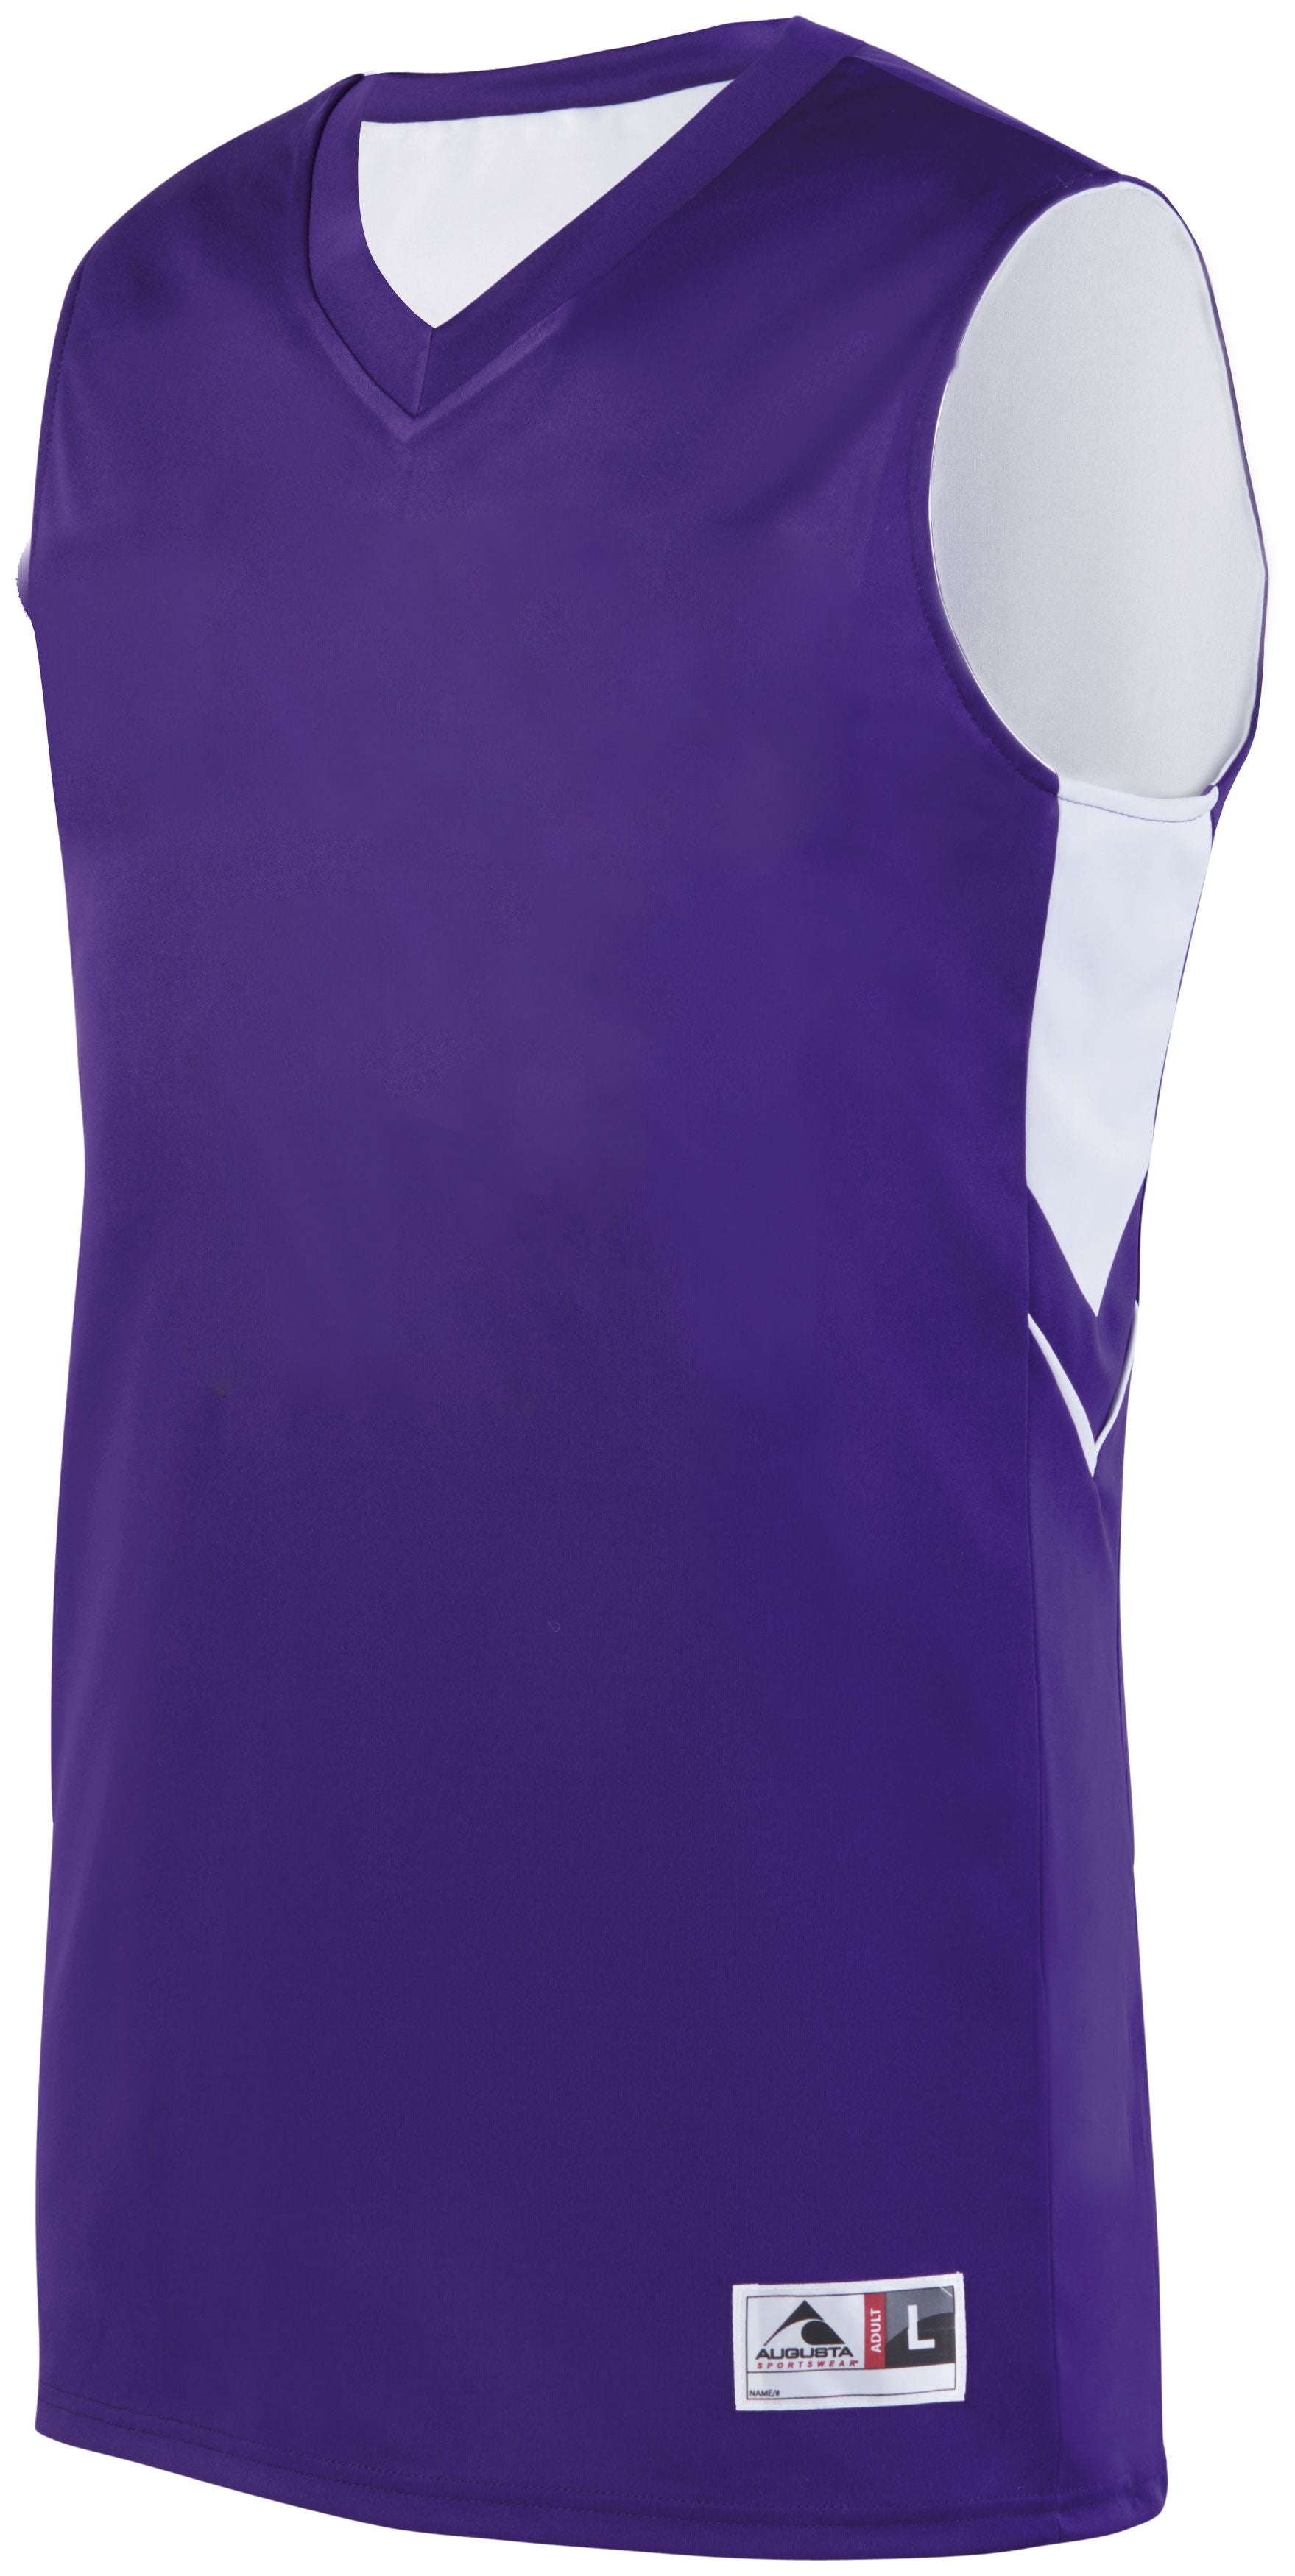 Augusta Sportswear Alley-Oop Reversible Jersey in Purple/White  -Part of the Adult, Adult-Jersey, Augusta-Products, Basketball, Shirts, All-Sports, All-Sports-1 product lines at KanaleyCreations.com